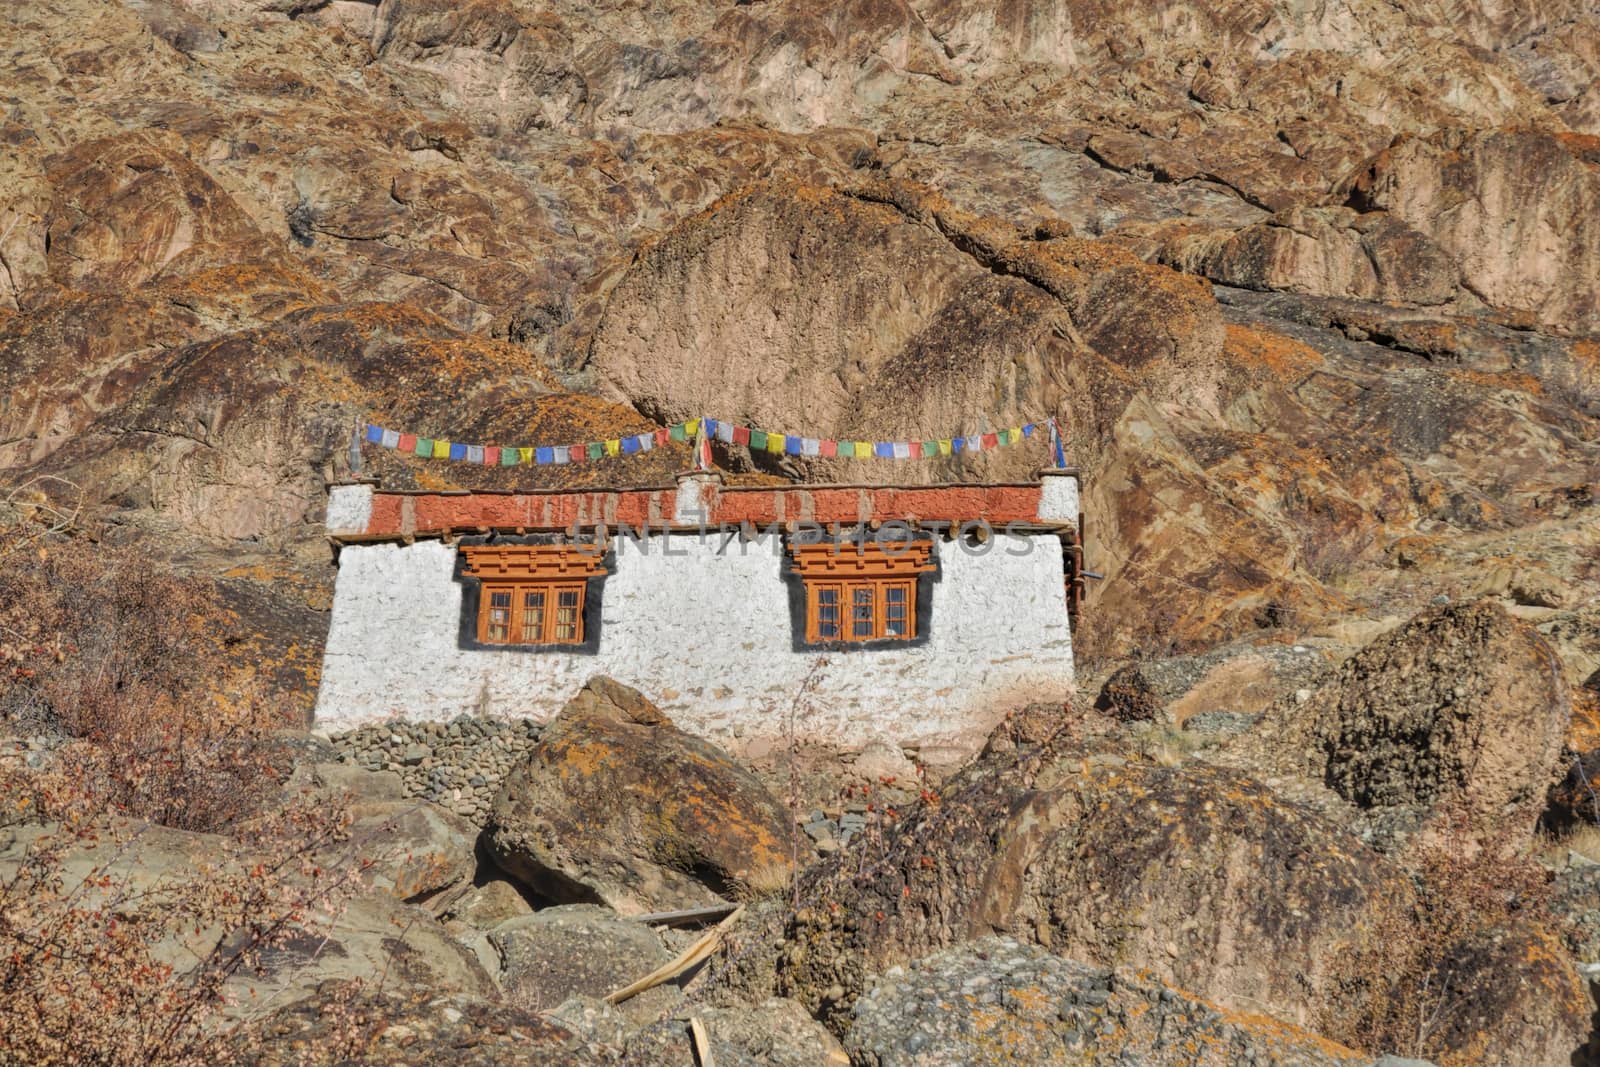 Part of Hemis Monastery built into a mountain